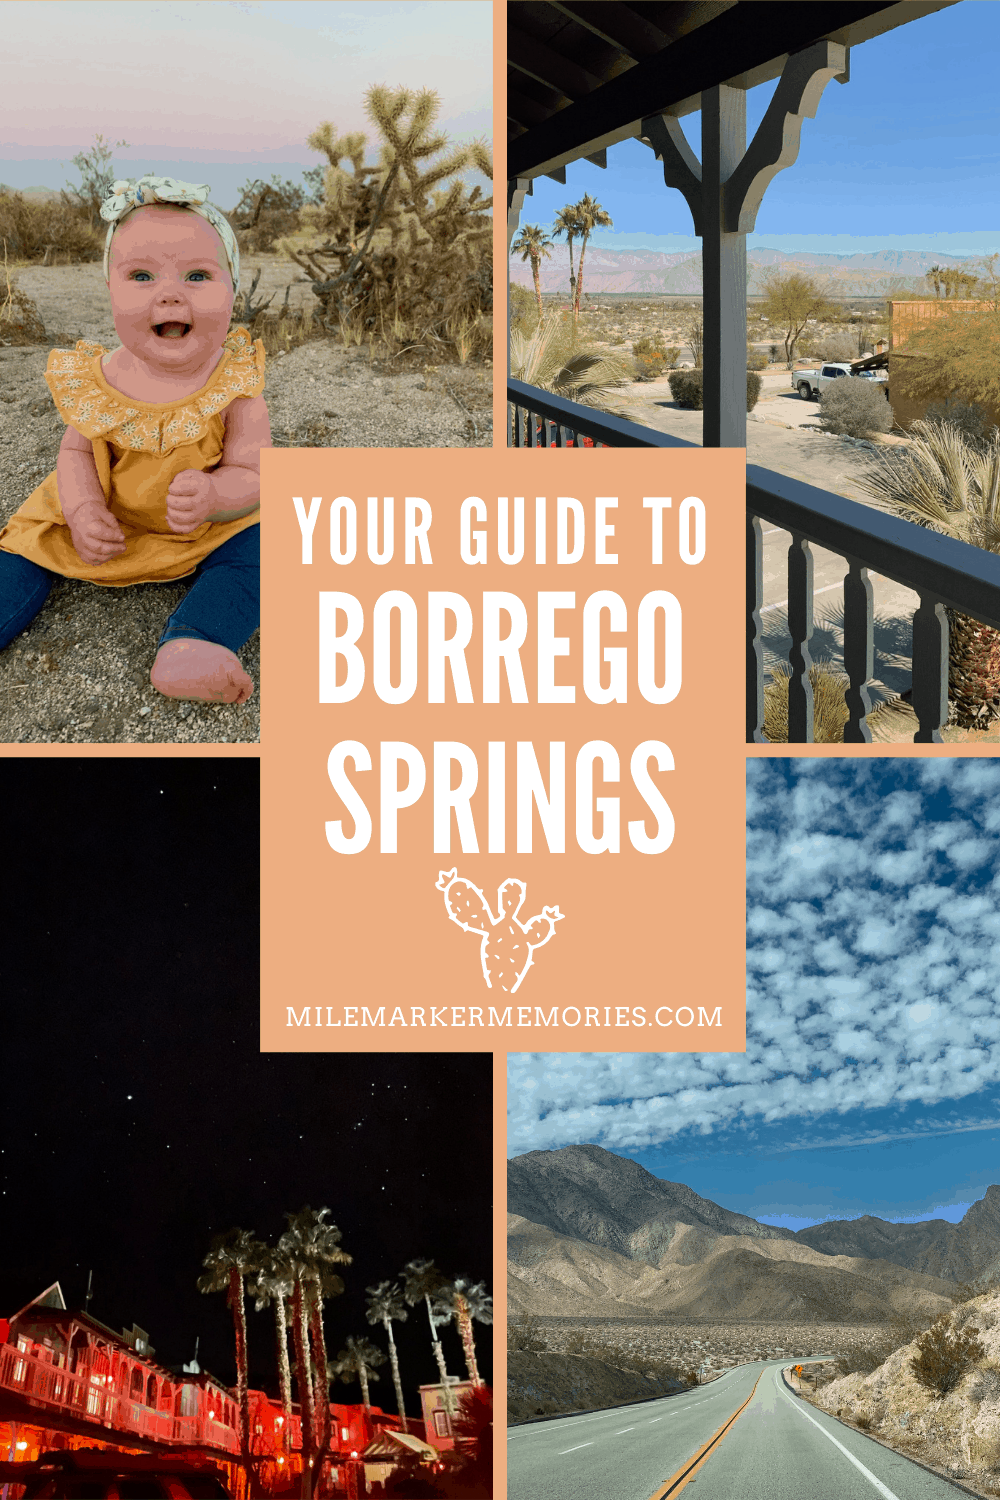 WHAT TO DO IN BORREGO SPRINGS